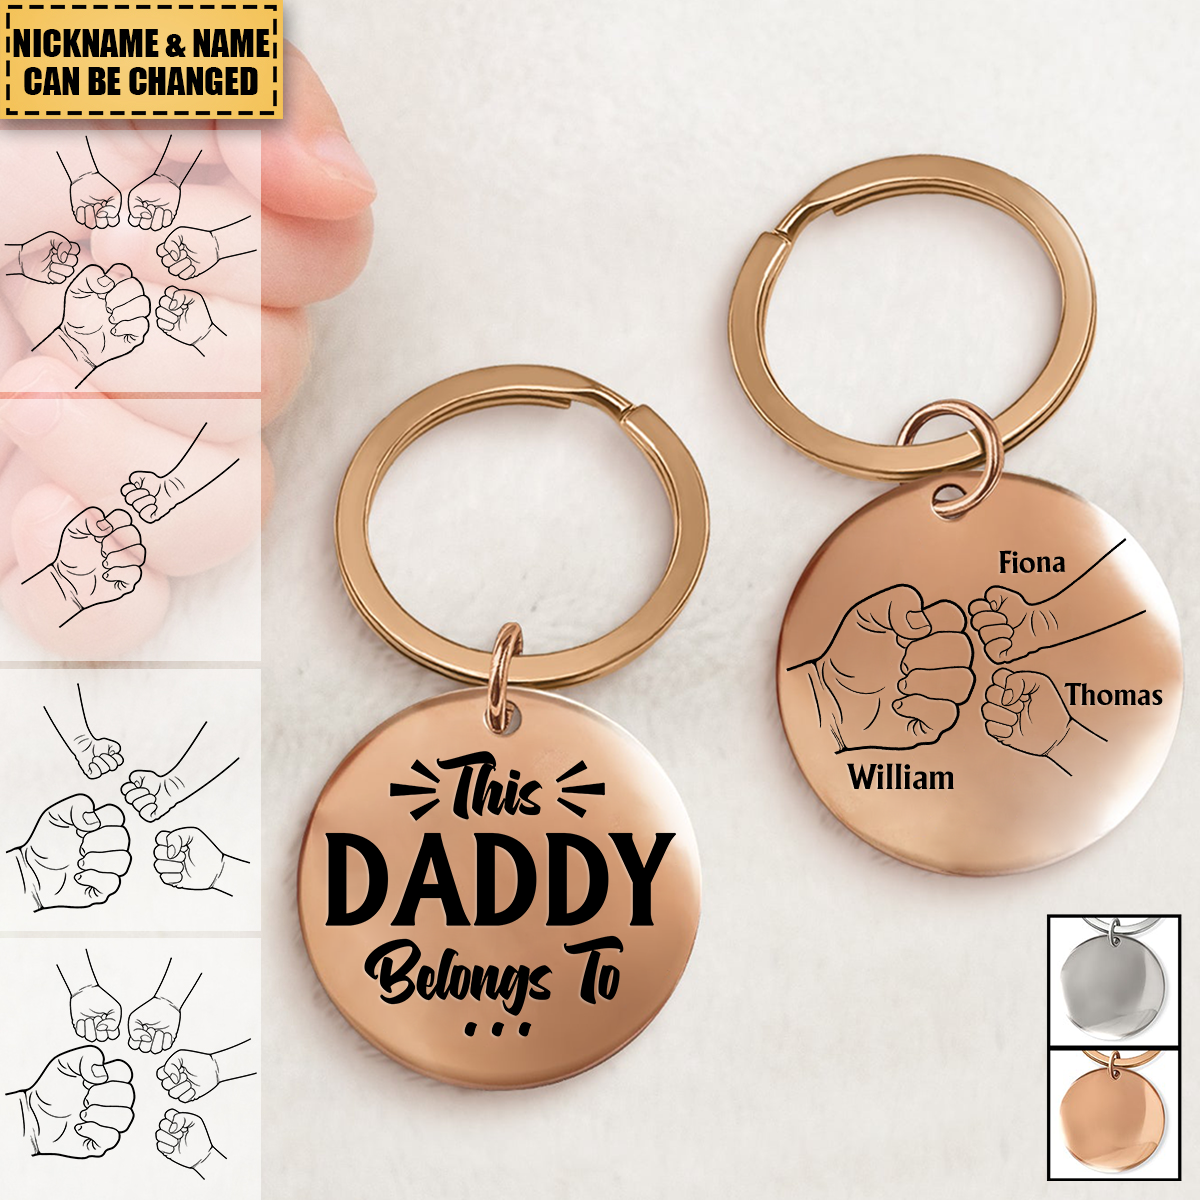 This Daddy Belongs To - Gift For Dad, Father, Grandpa - Personalized Keyring